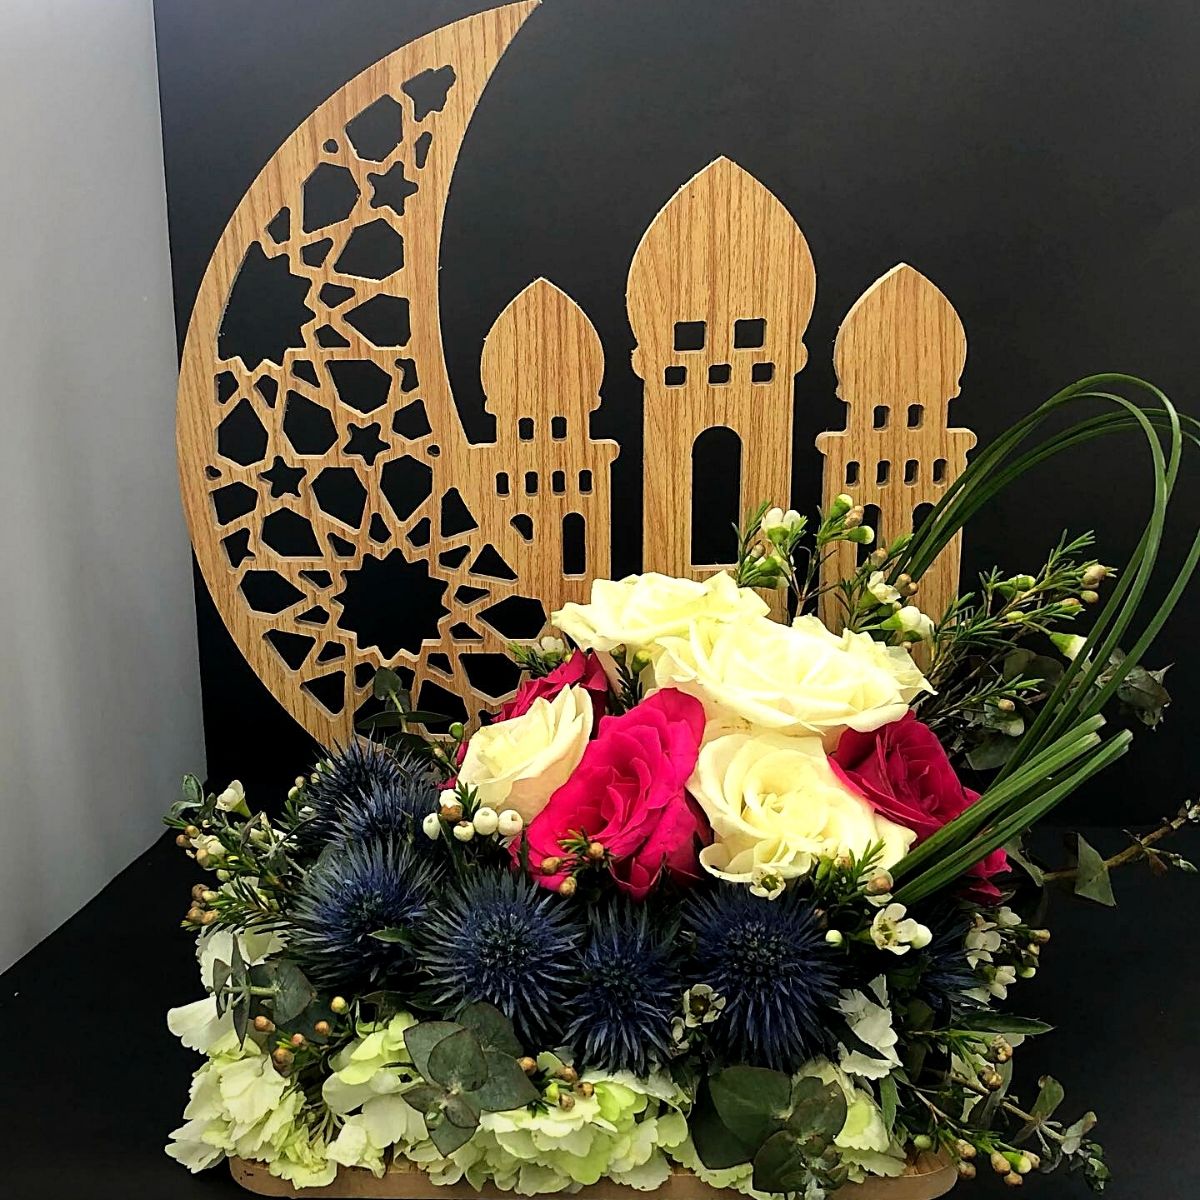 ​Flowers for the Islamic Holy Month of Ramadan